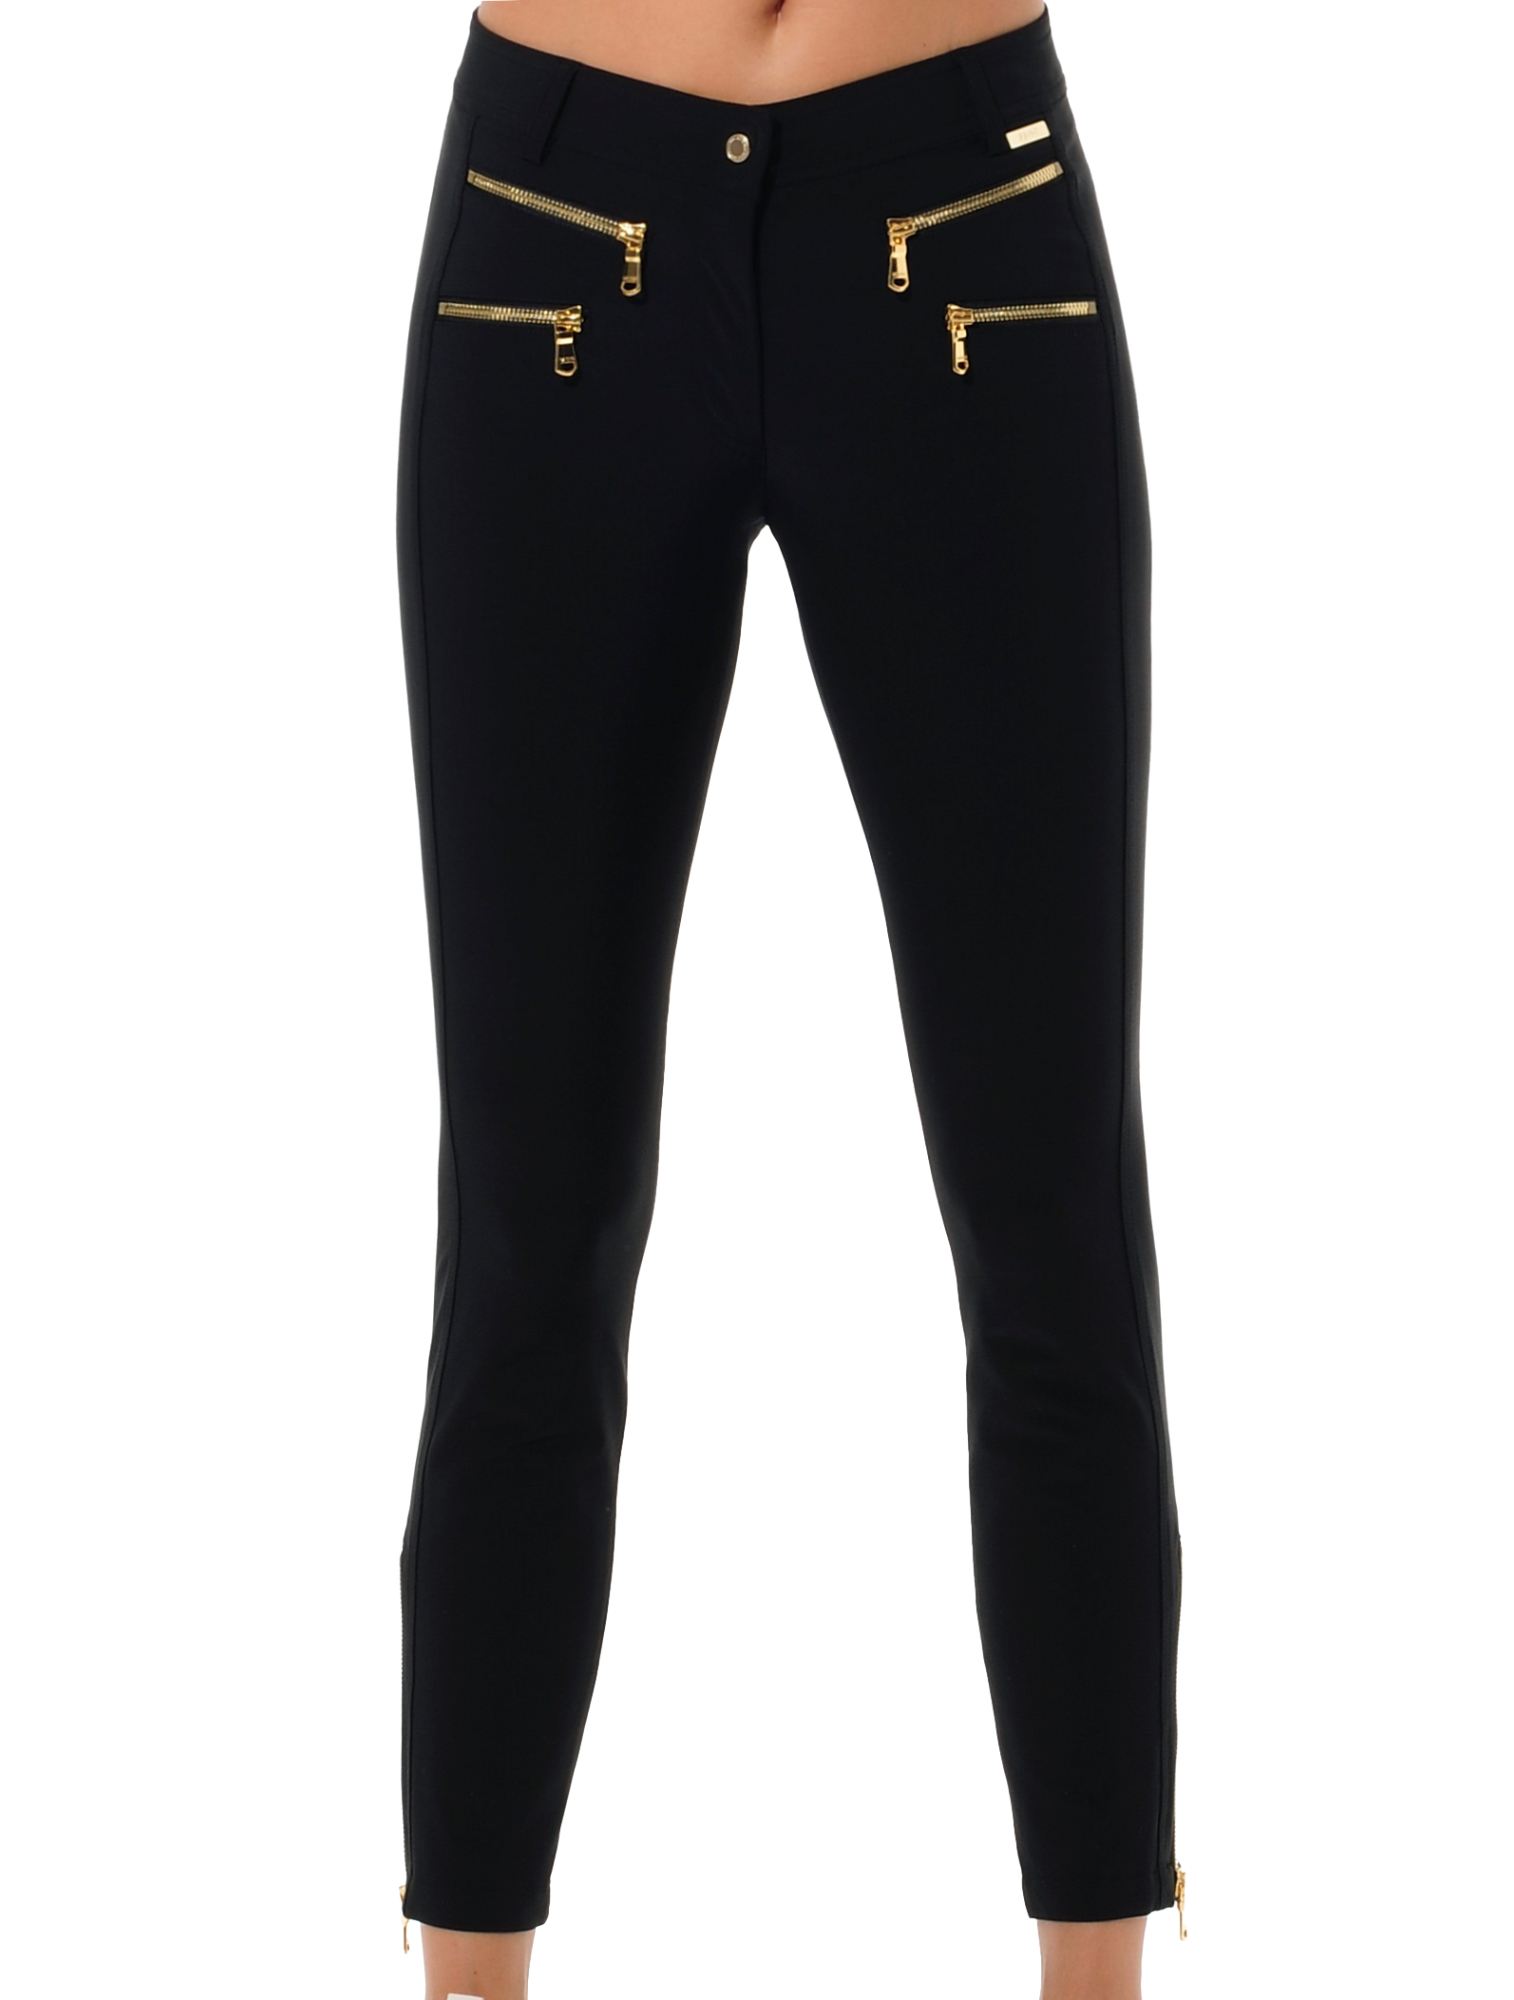 4way stretch shiny gold double zip ankle pants black 